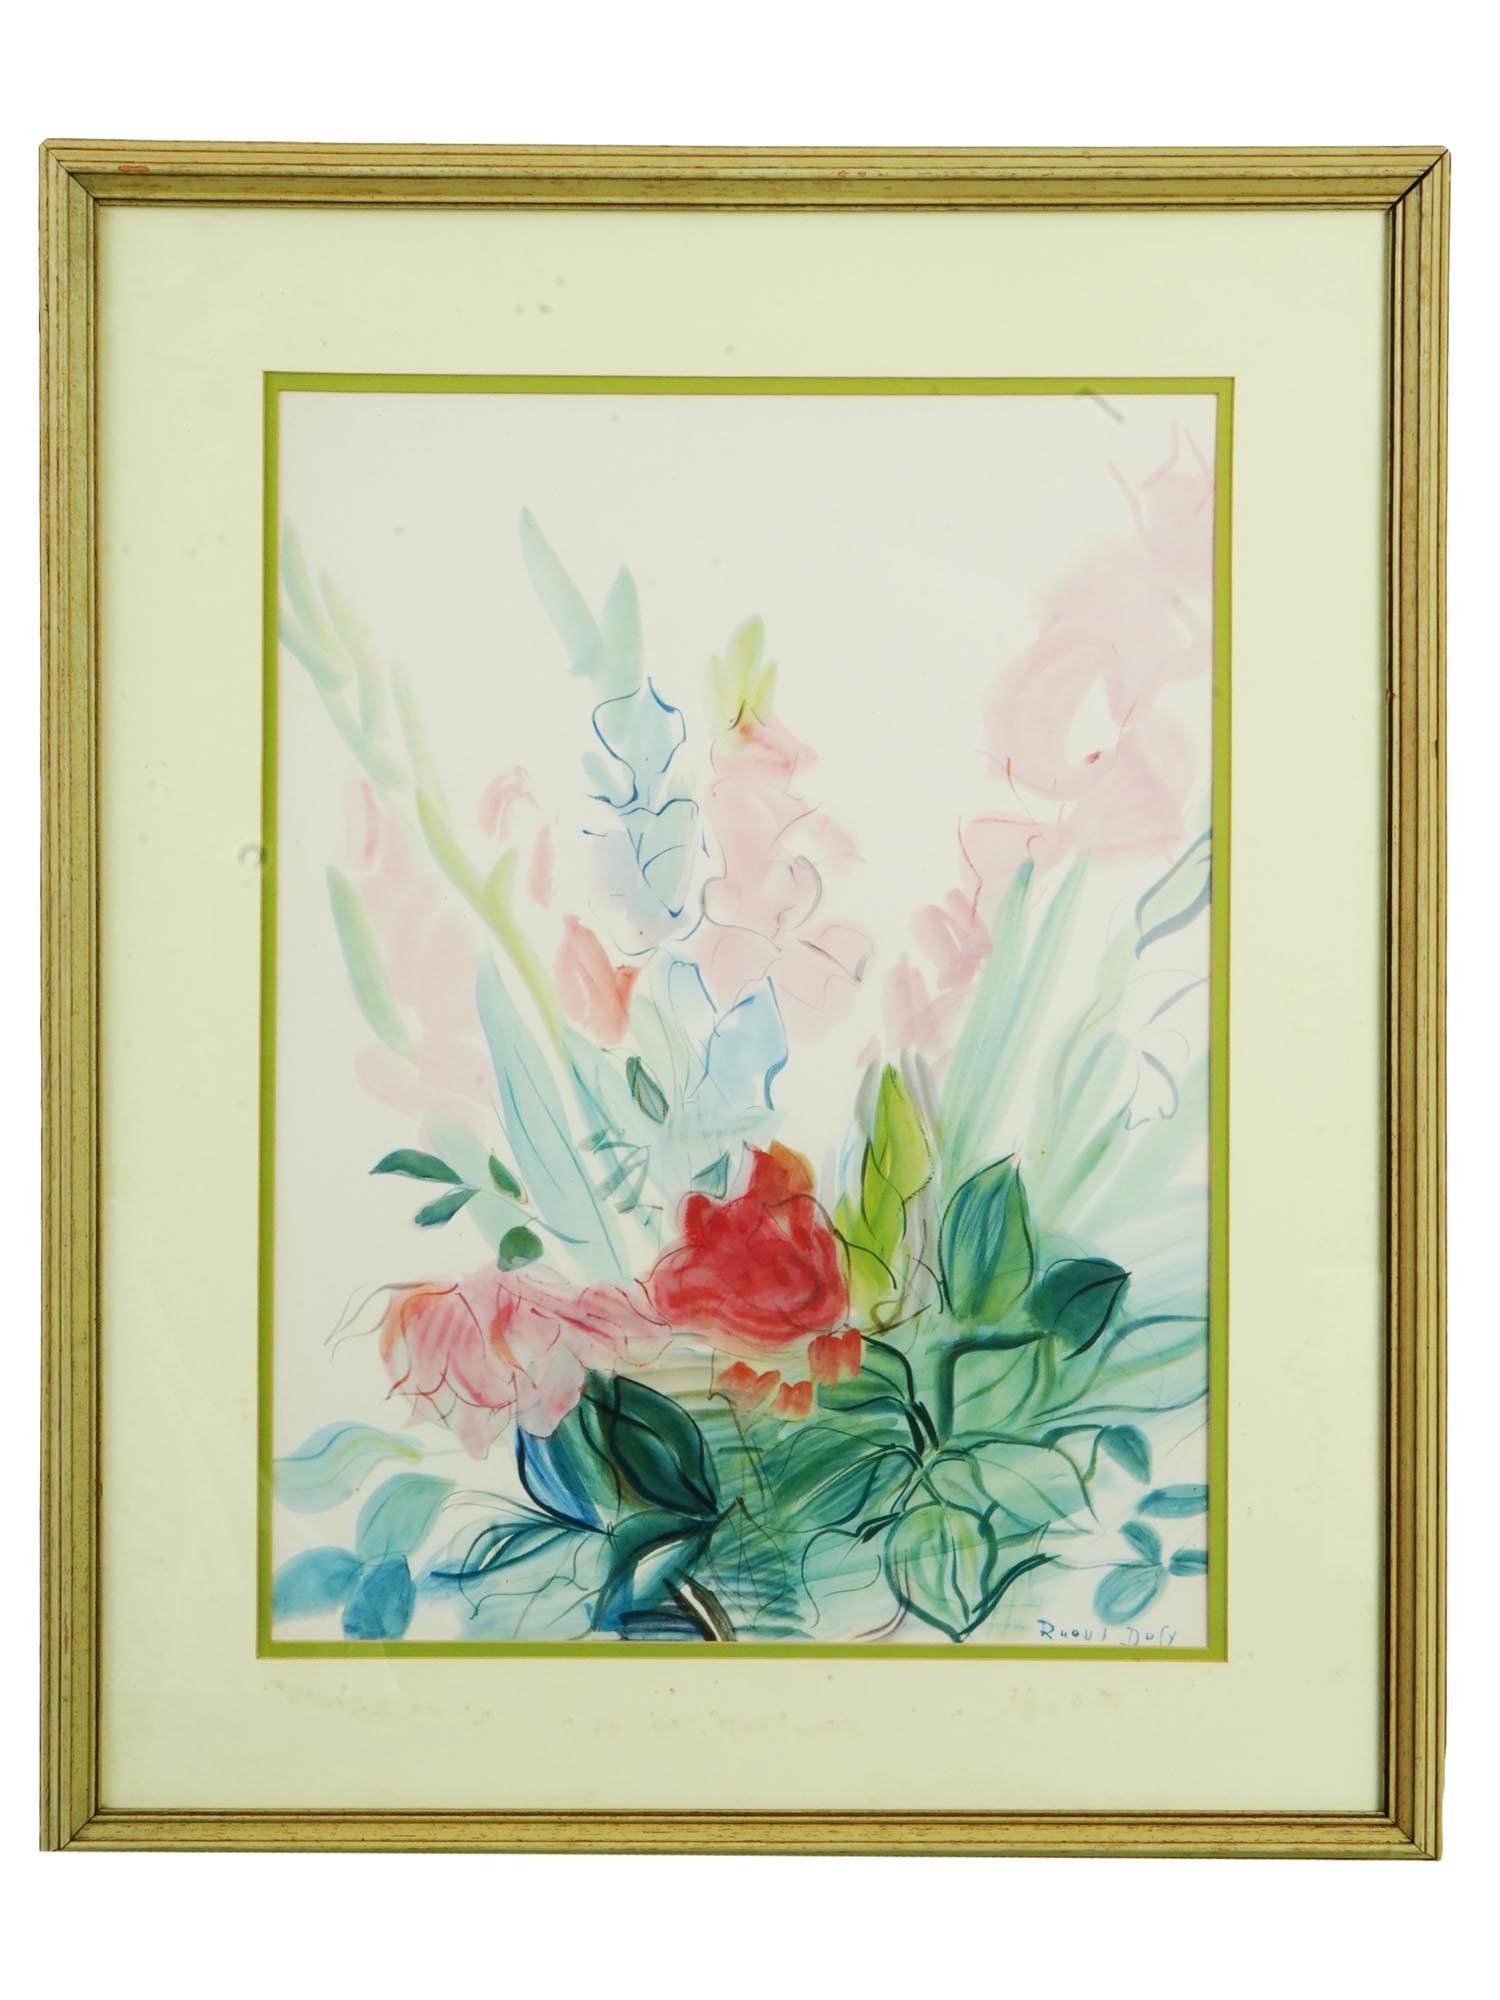 FRENCH PARIS SCHOOL FLOWERS LITHOGRAPH BY RAOUL DUFY PIC-0